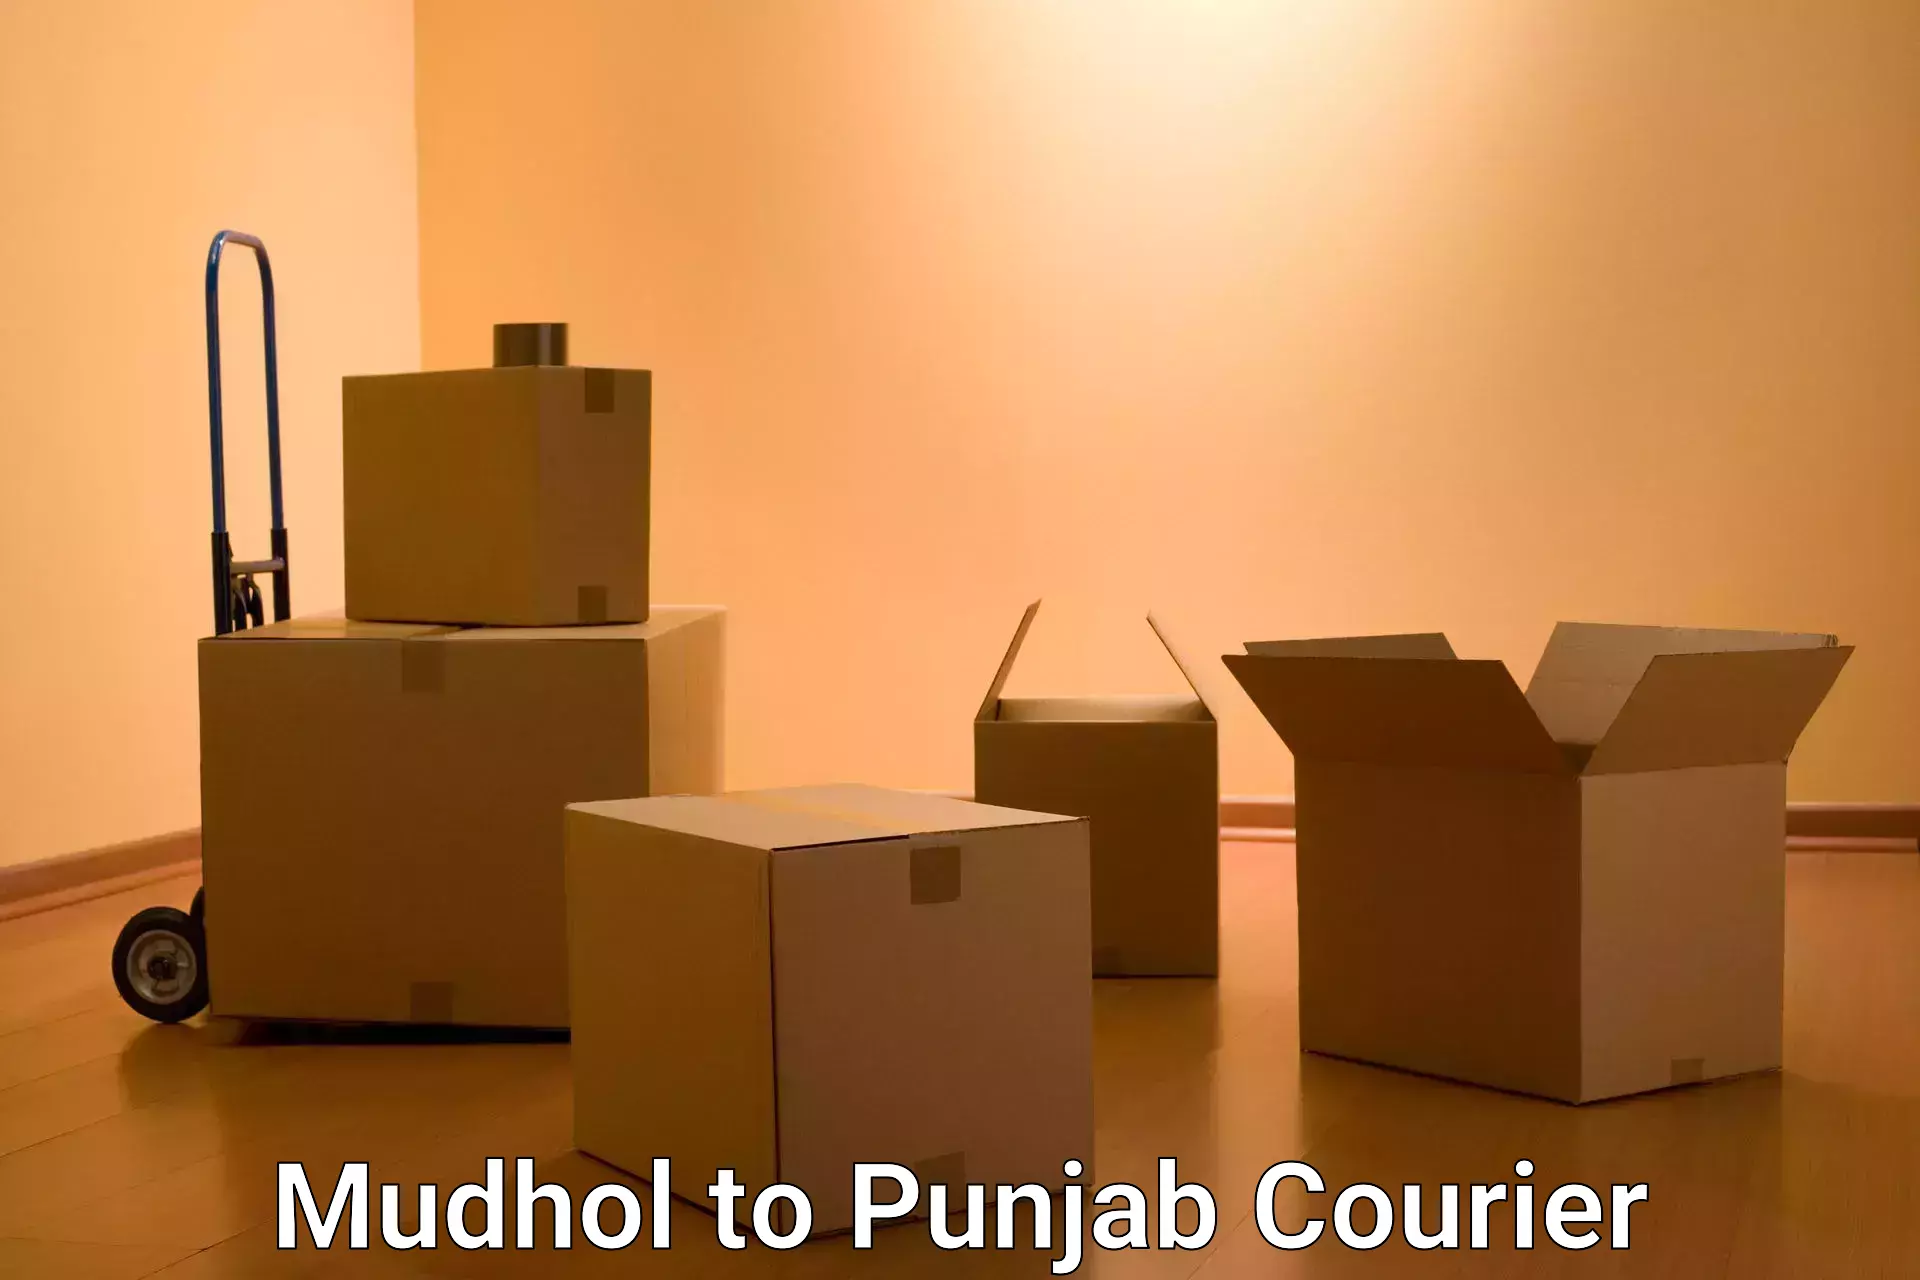 International courier networks Mudhol to Mohali